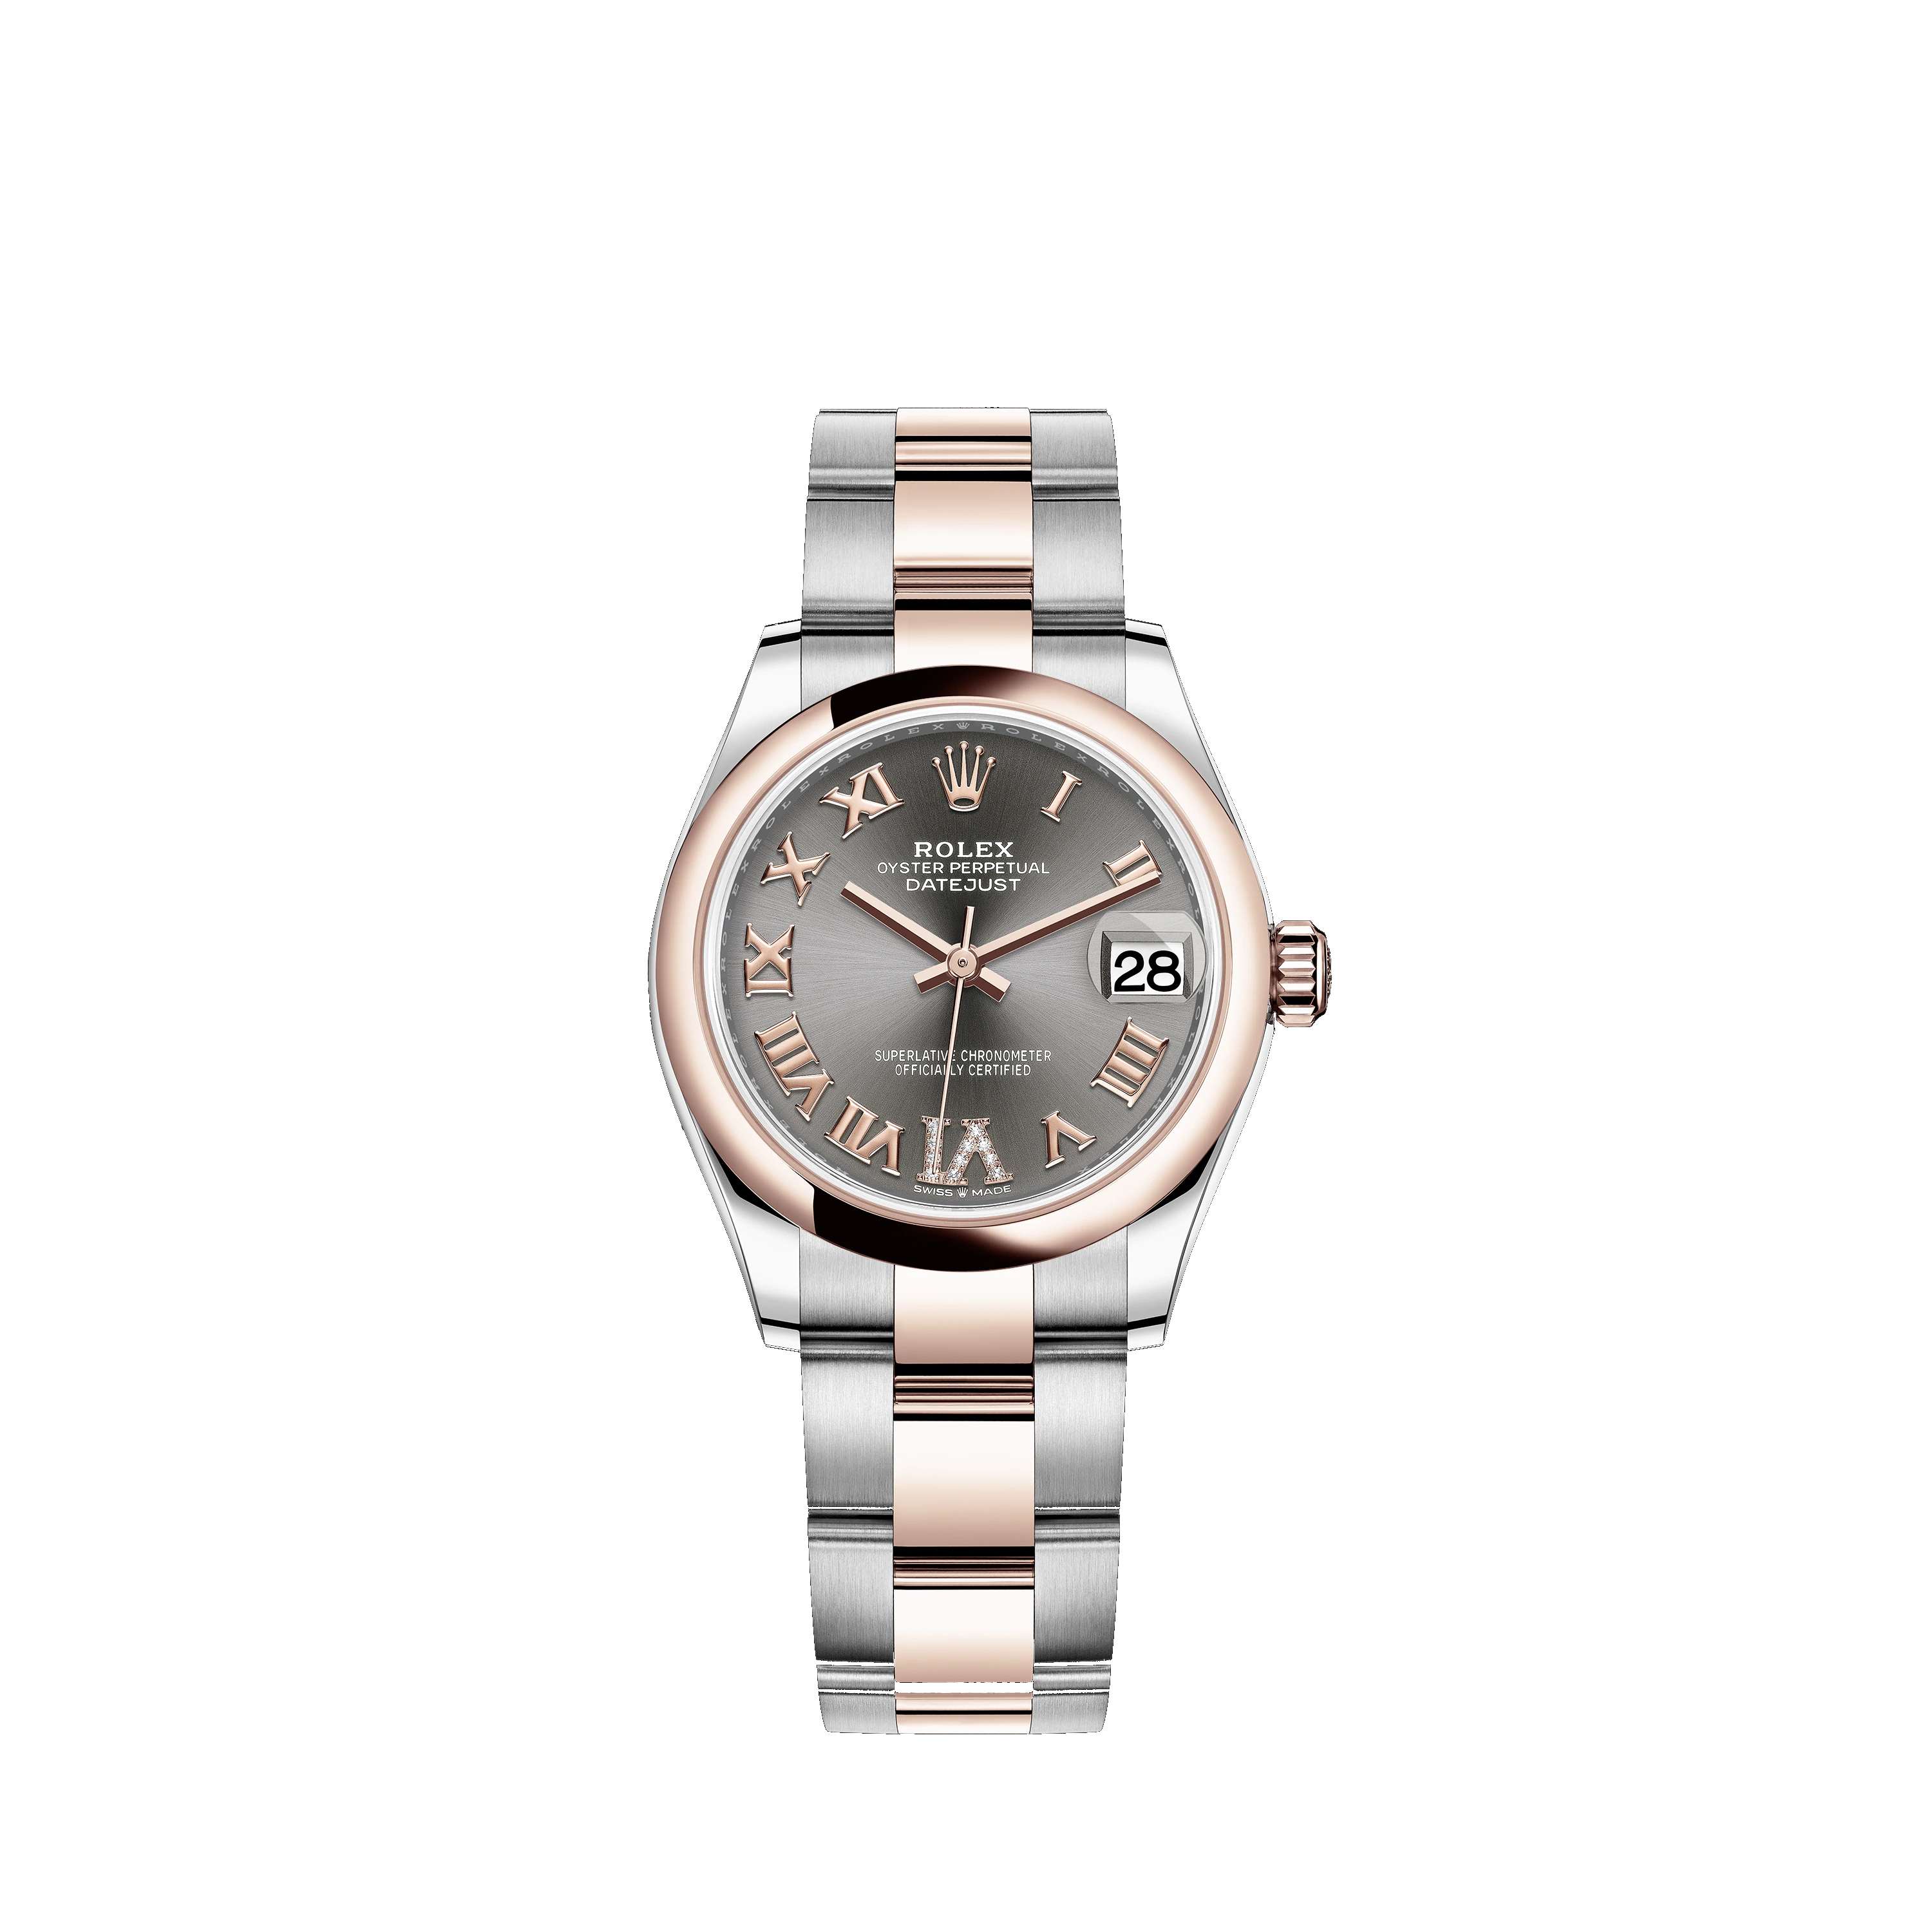 Datejust 31 278241 Rose Gold & Stainless Steel Watch (Rhodium Set with Diamonds)